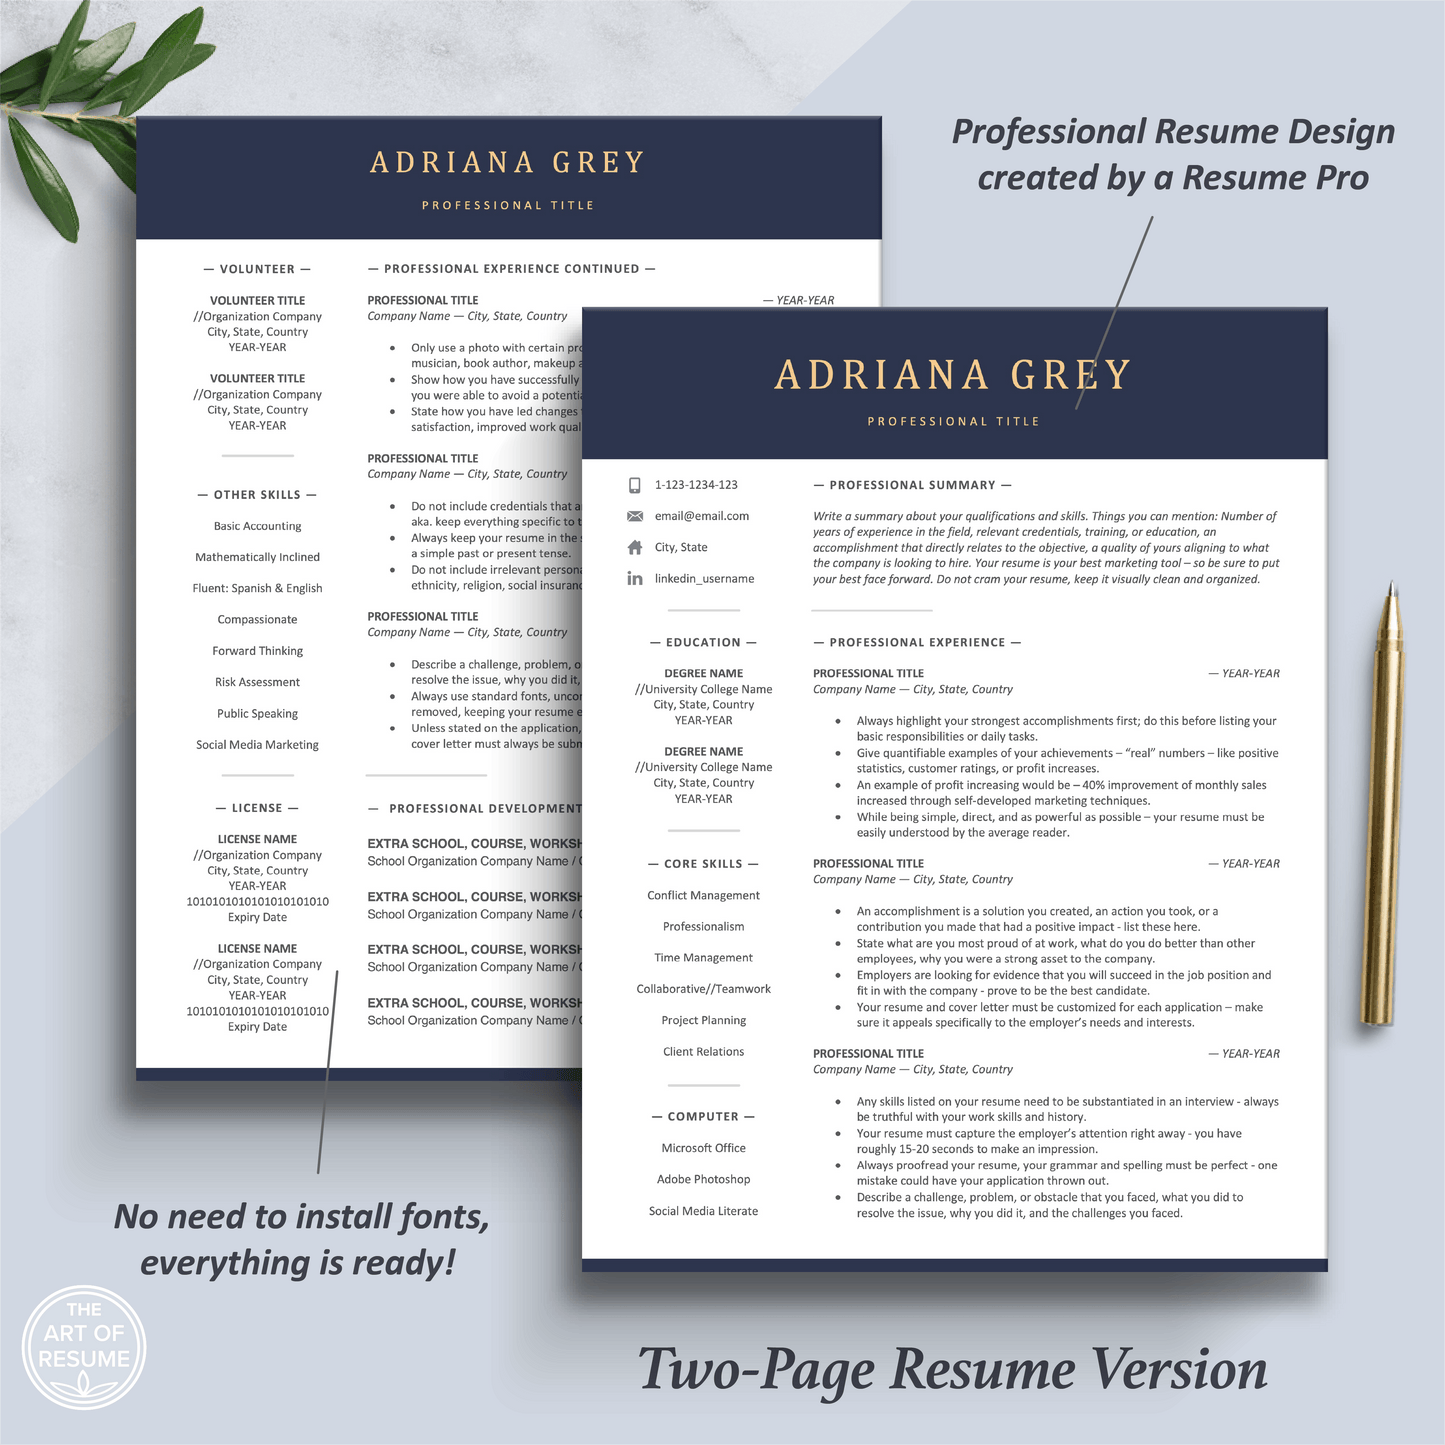 The Art of Resume Templates | Two-Page Modern Executive CEO C-Suite Level Resume CV Design Template Builder Maker | Curriculum Vitae